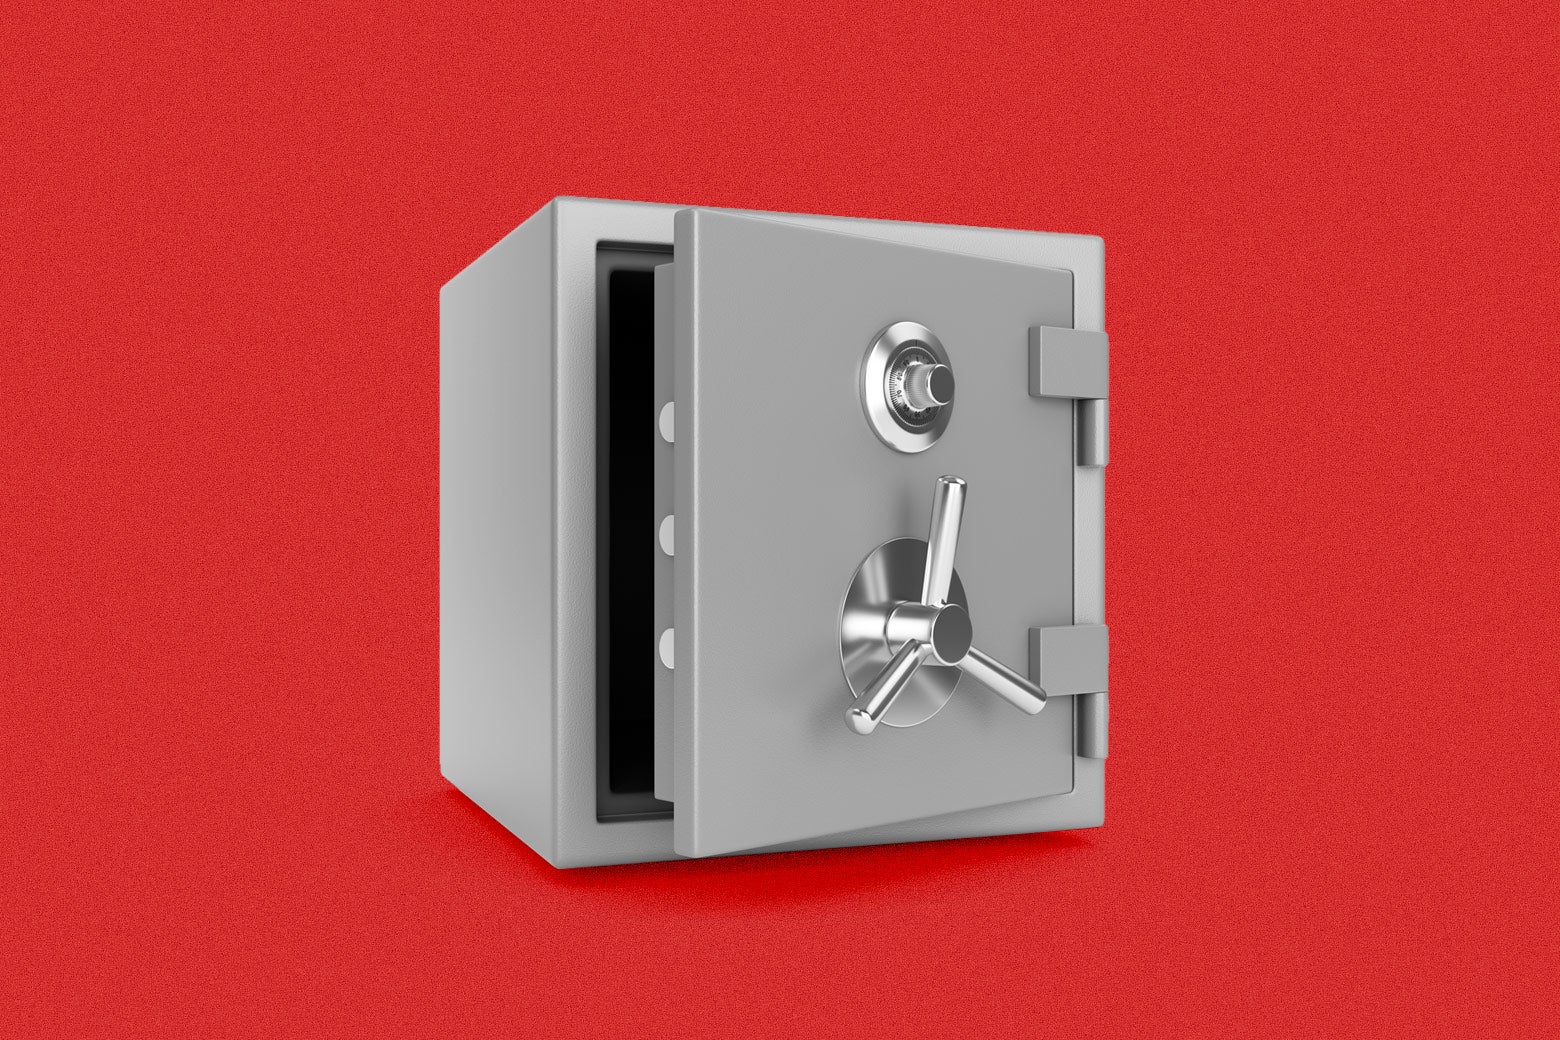 A slightly ajar grey box safe with two knobs on a red background. 